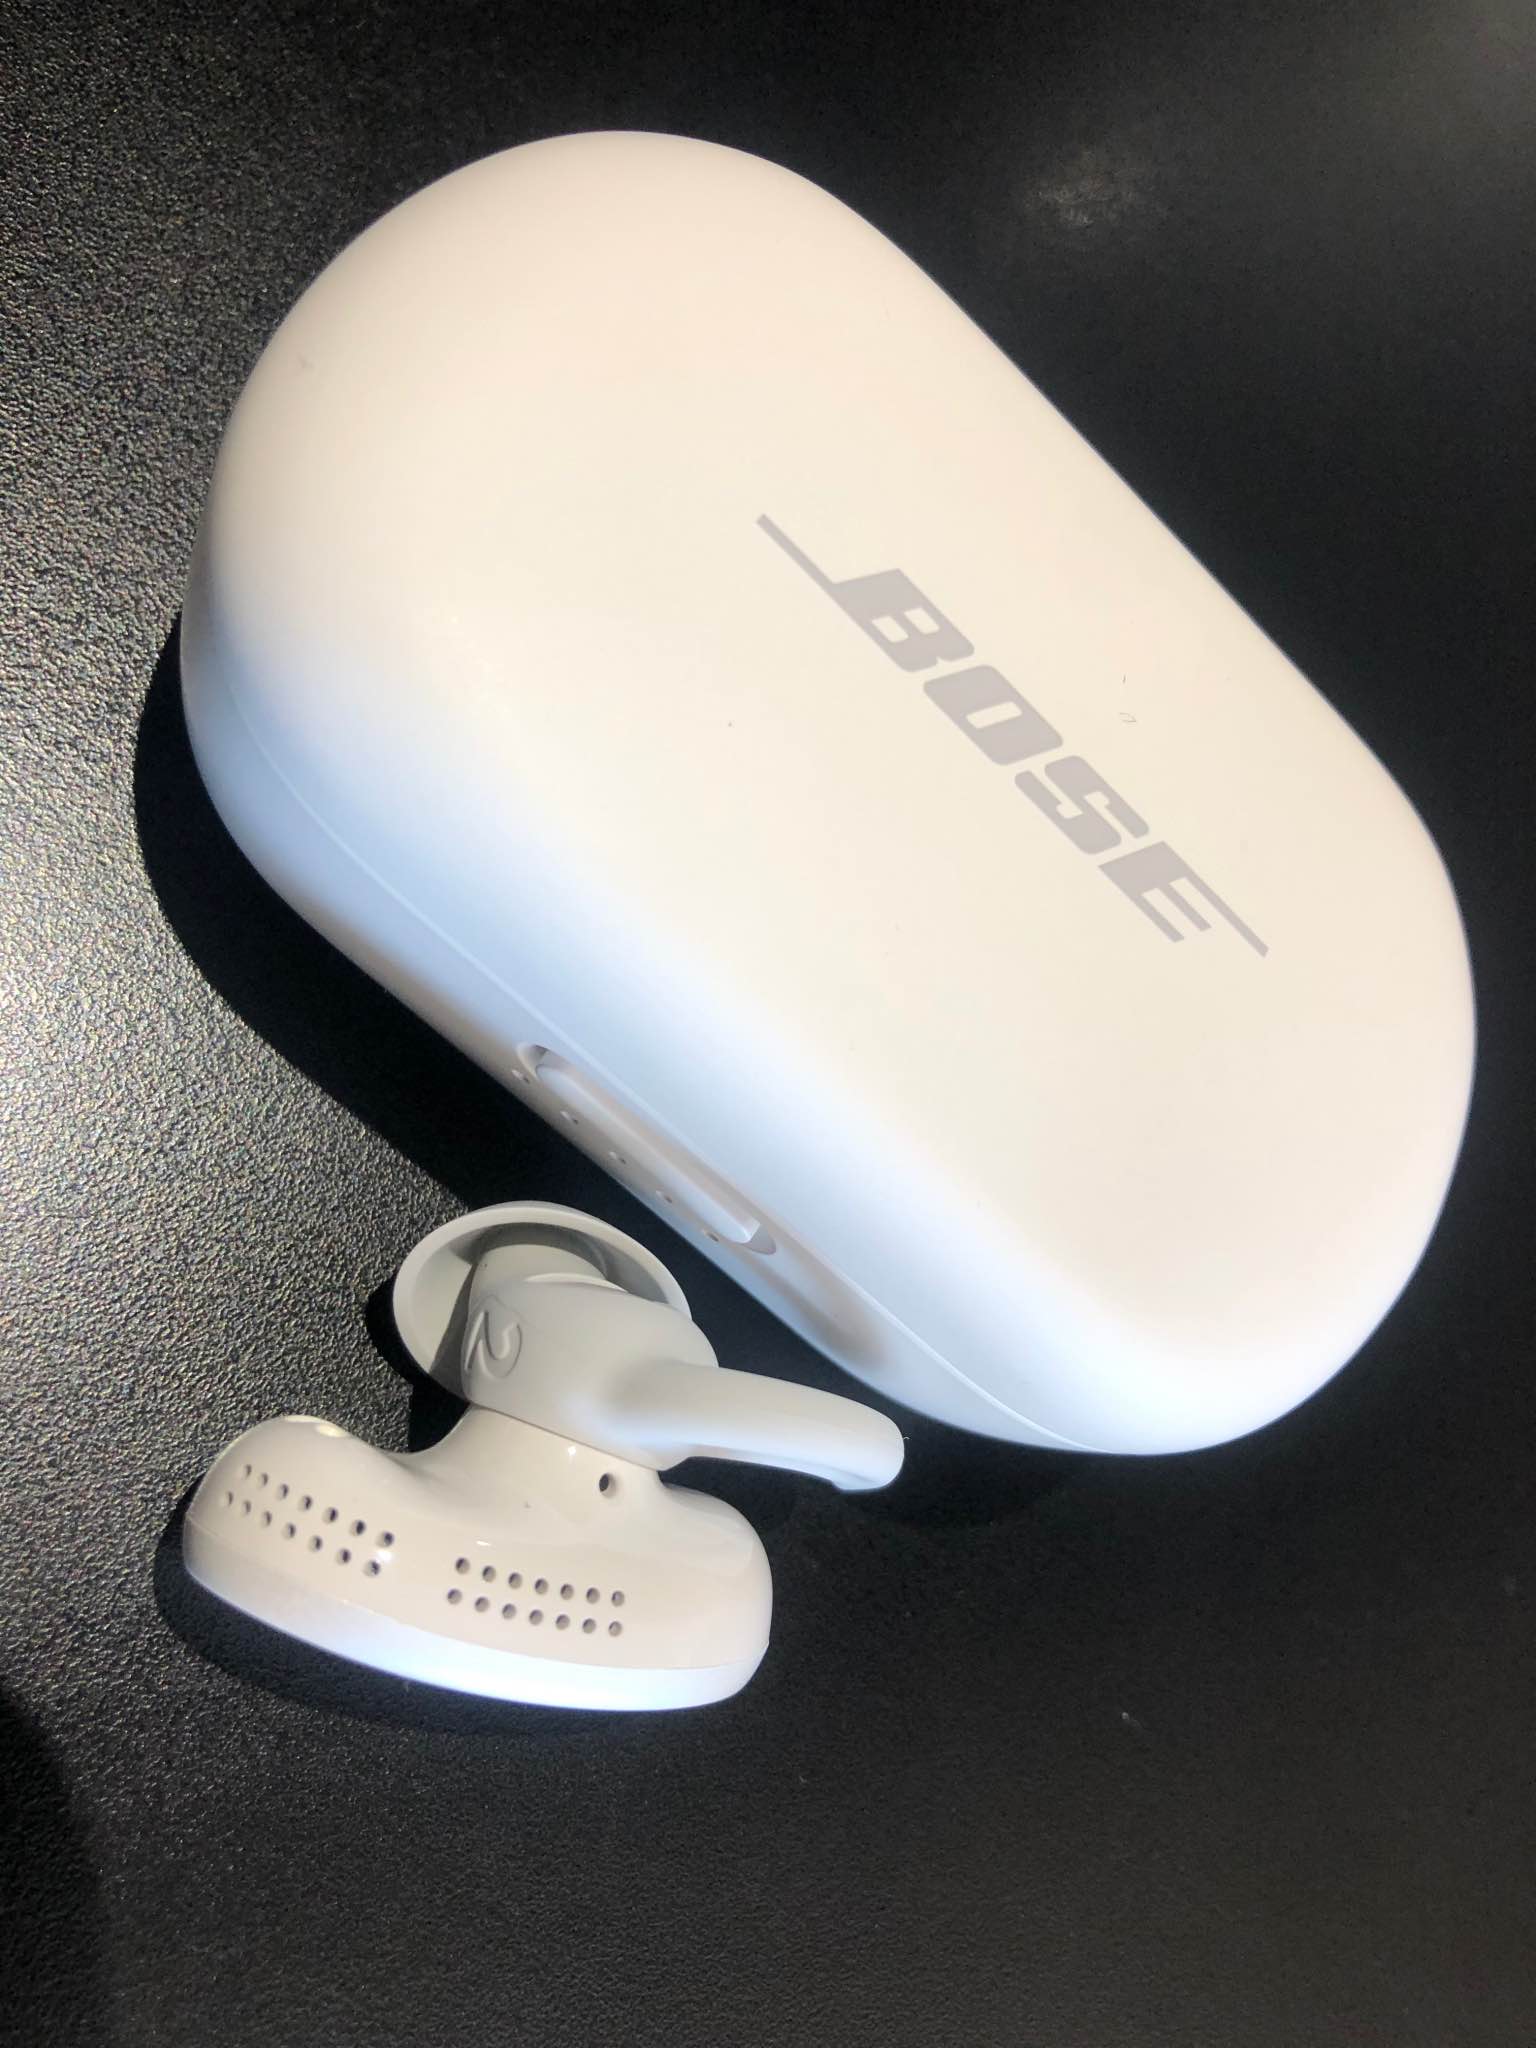 Bose QuietComfort Noise Cancelling Earbuds Box